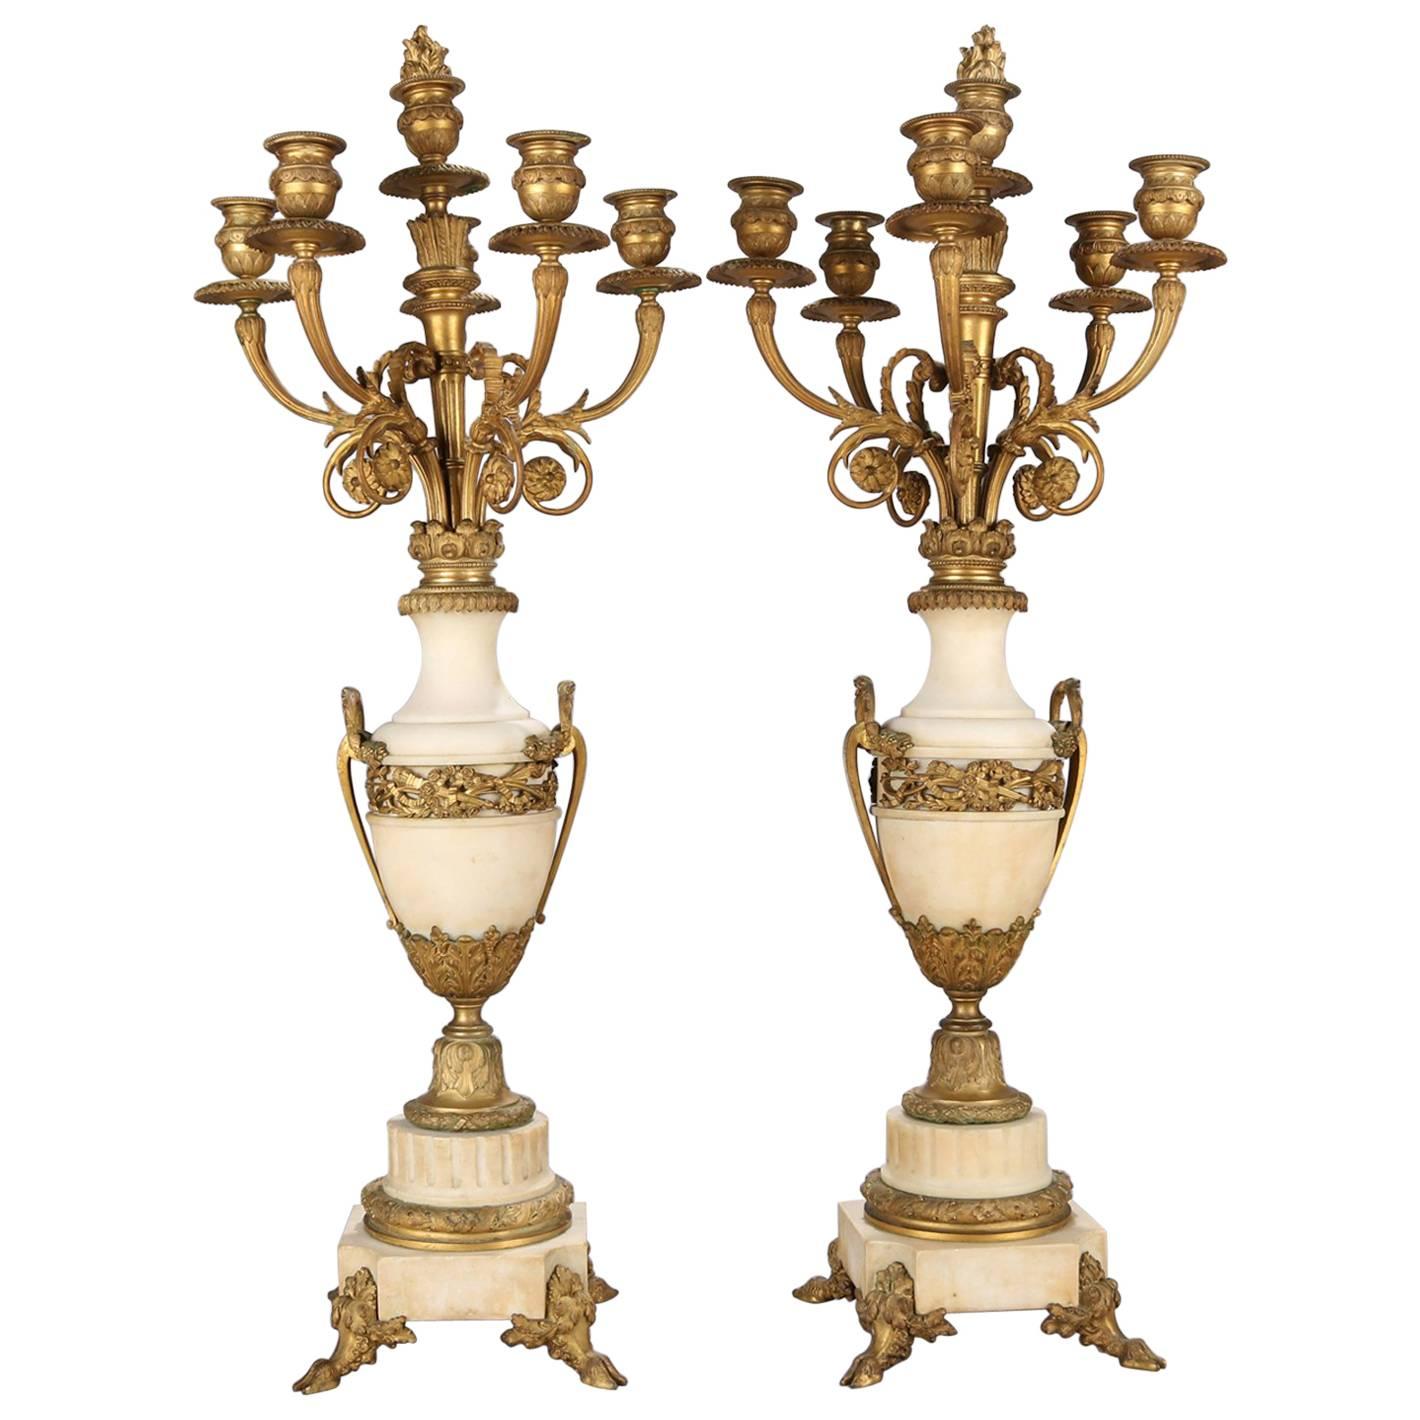 Oversized French Classical Urn Form Marble and Gilt Bronze Candelabras